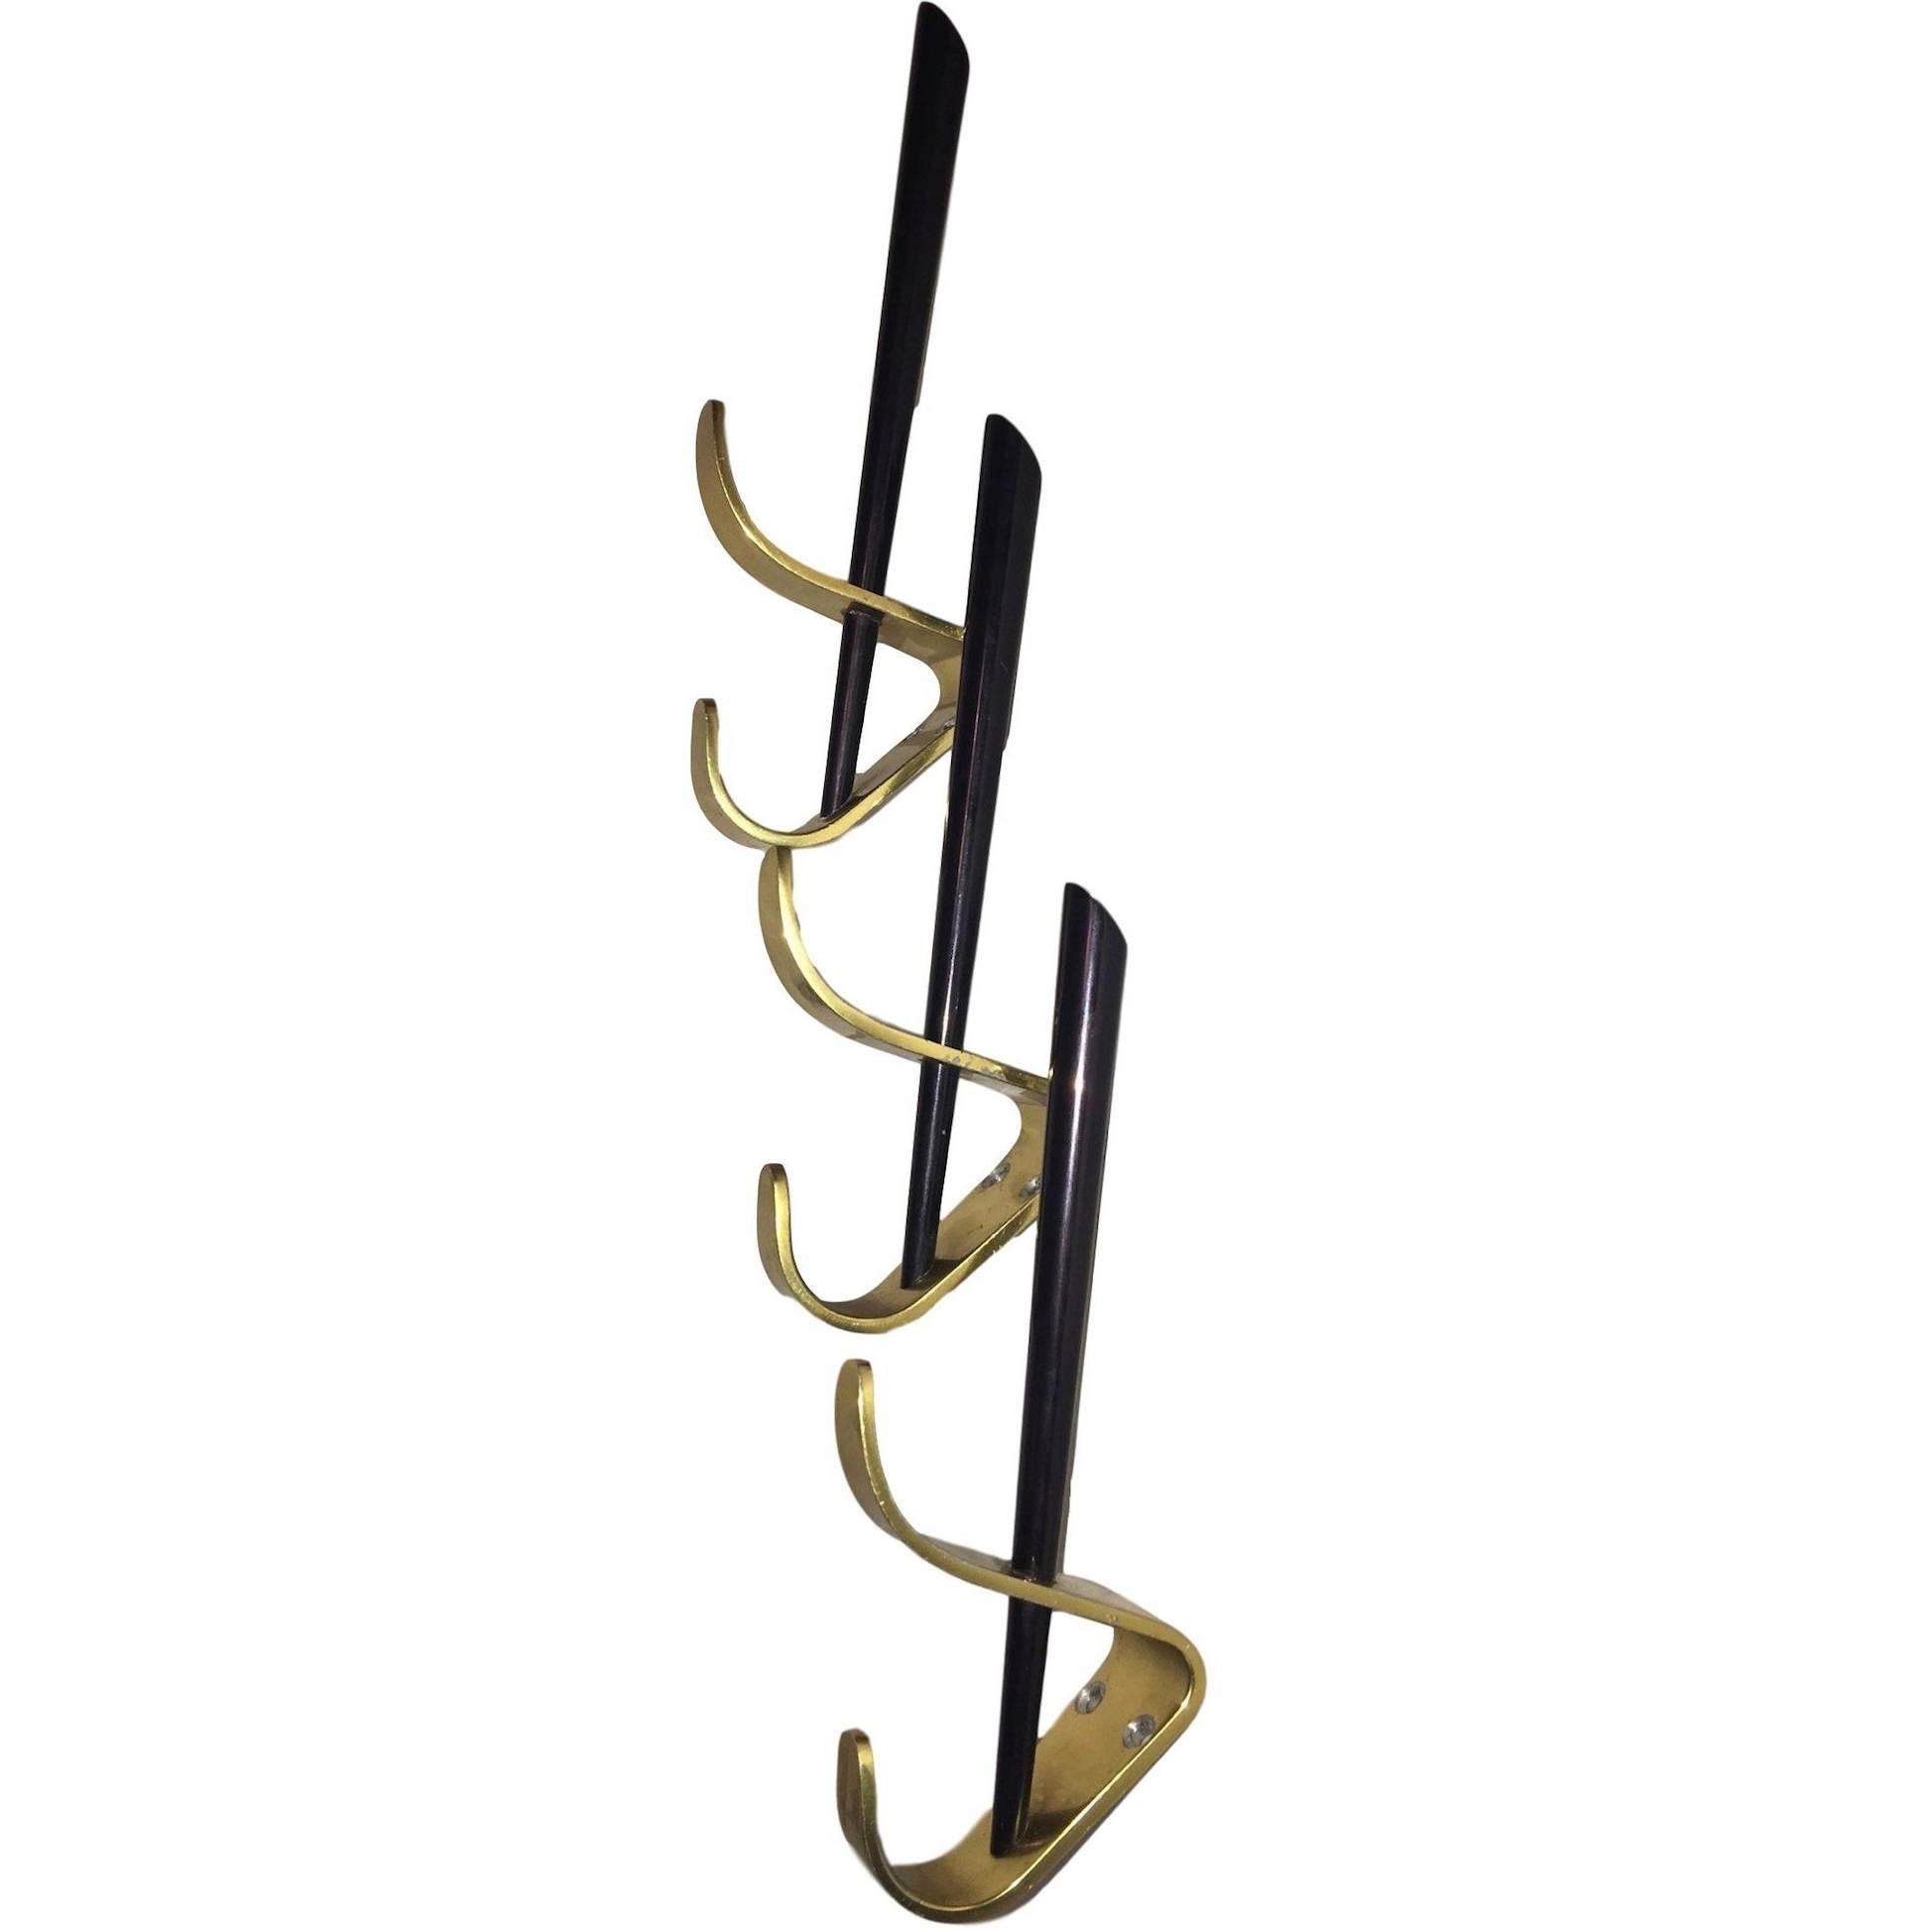 Three Midcentury 1950s Wall Hook Black and Brass Modernist Style